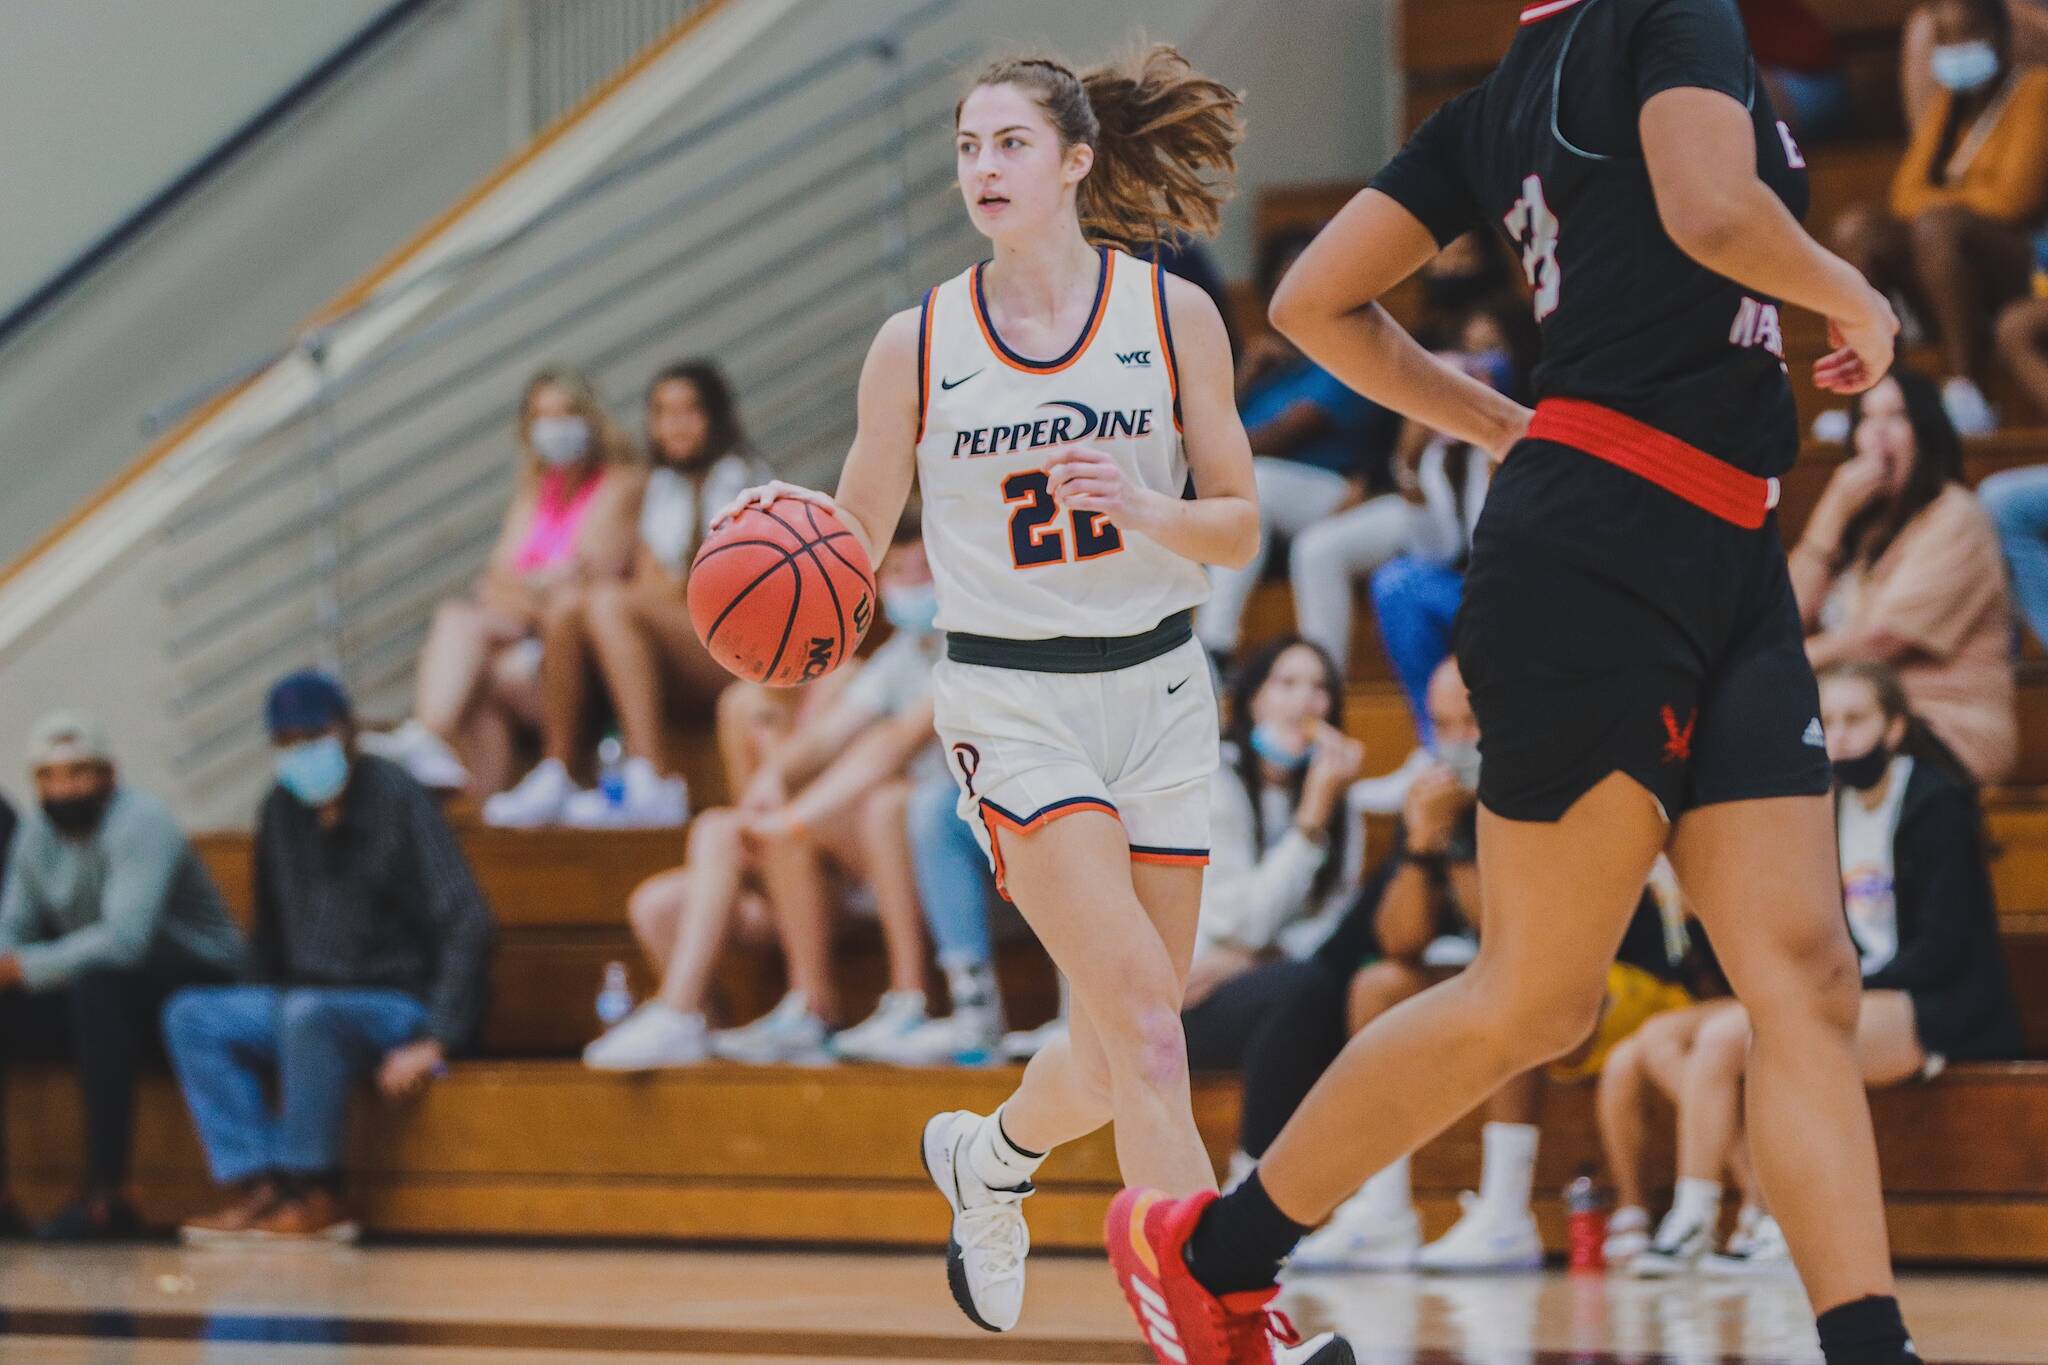 Courtesy photo / Pepperdine University 
Former JDHS player Kendyl Carson is now leading the Pepperdine women’s basketball team on the court and off as the captain.